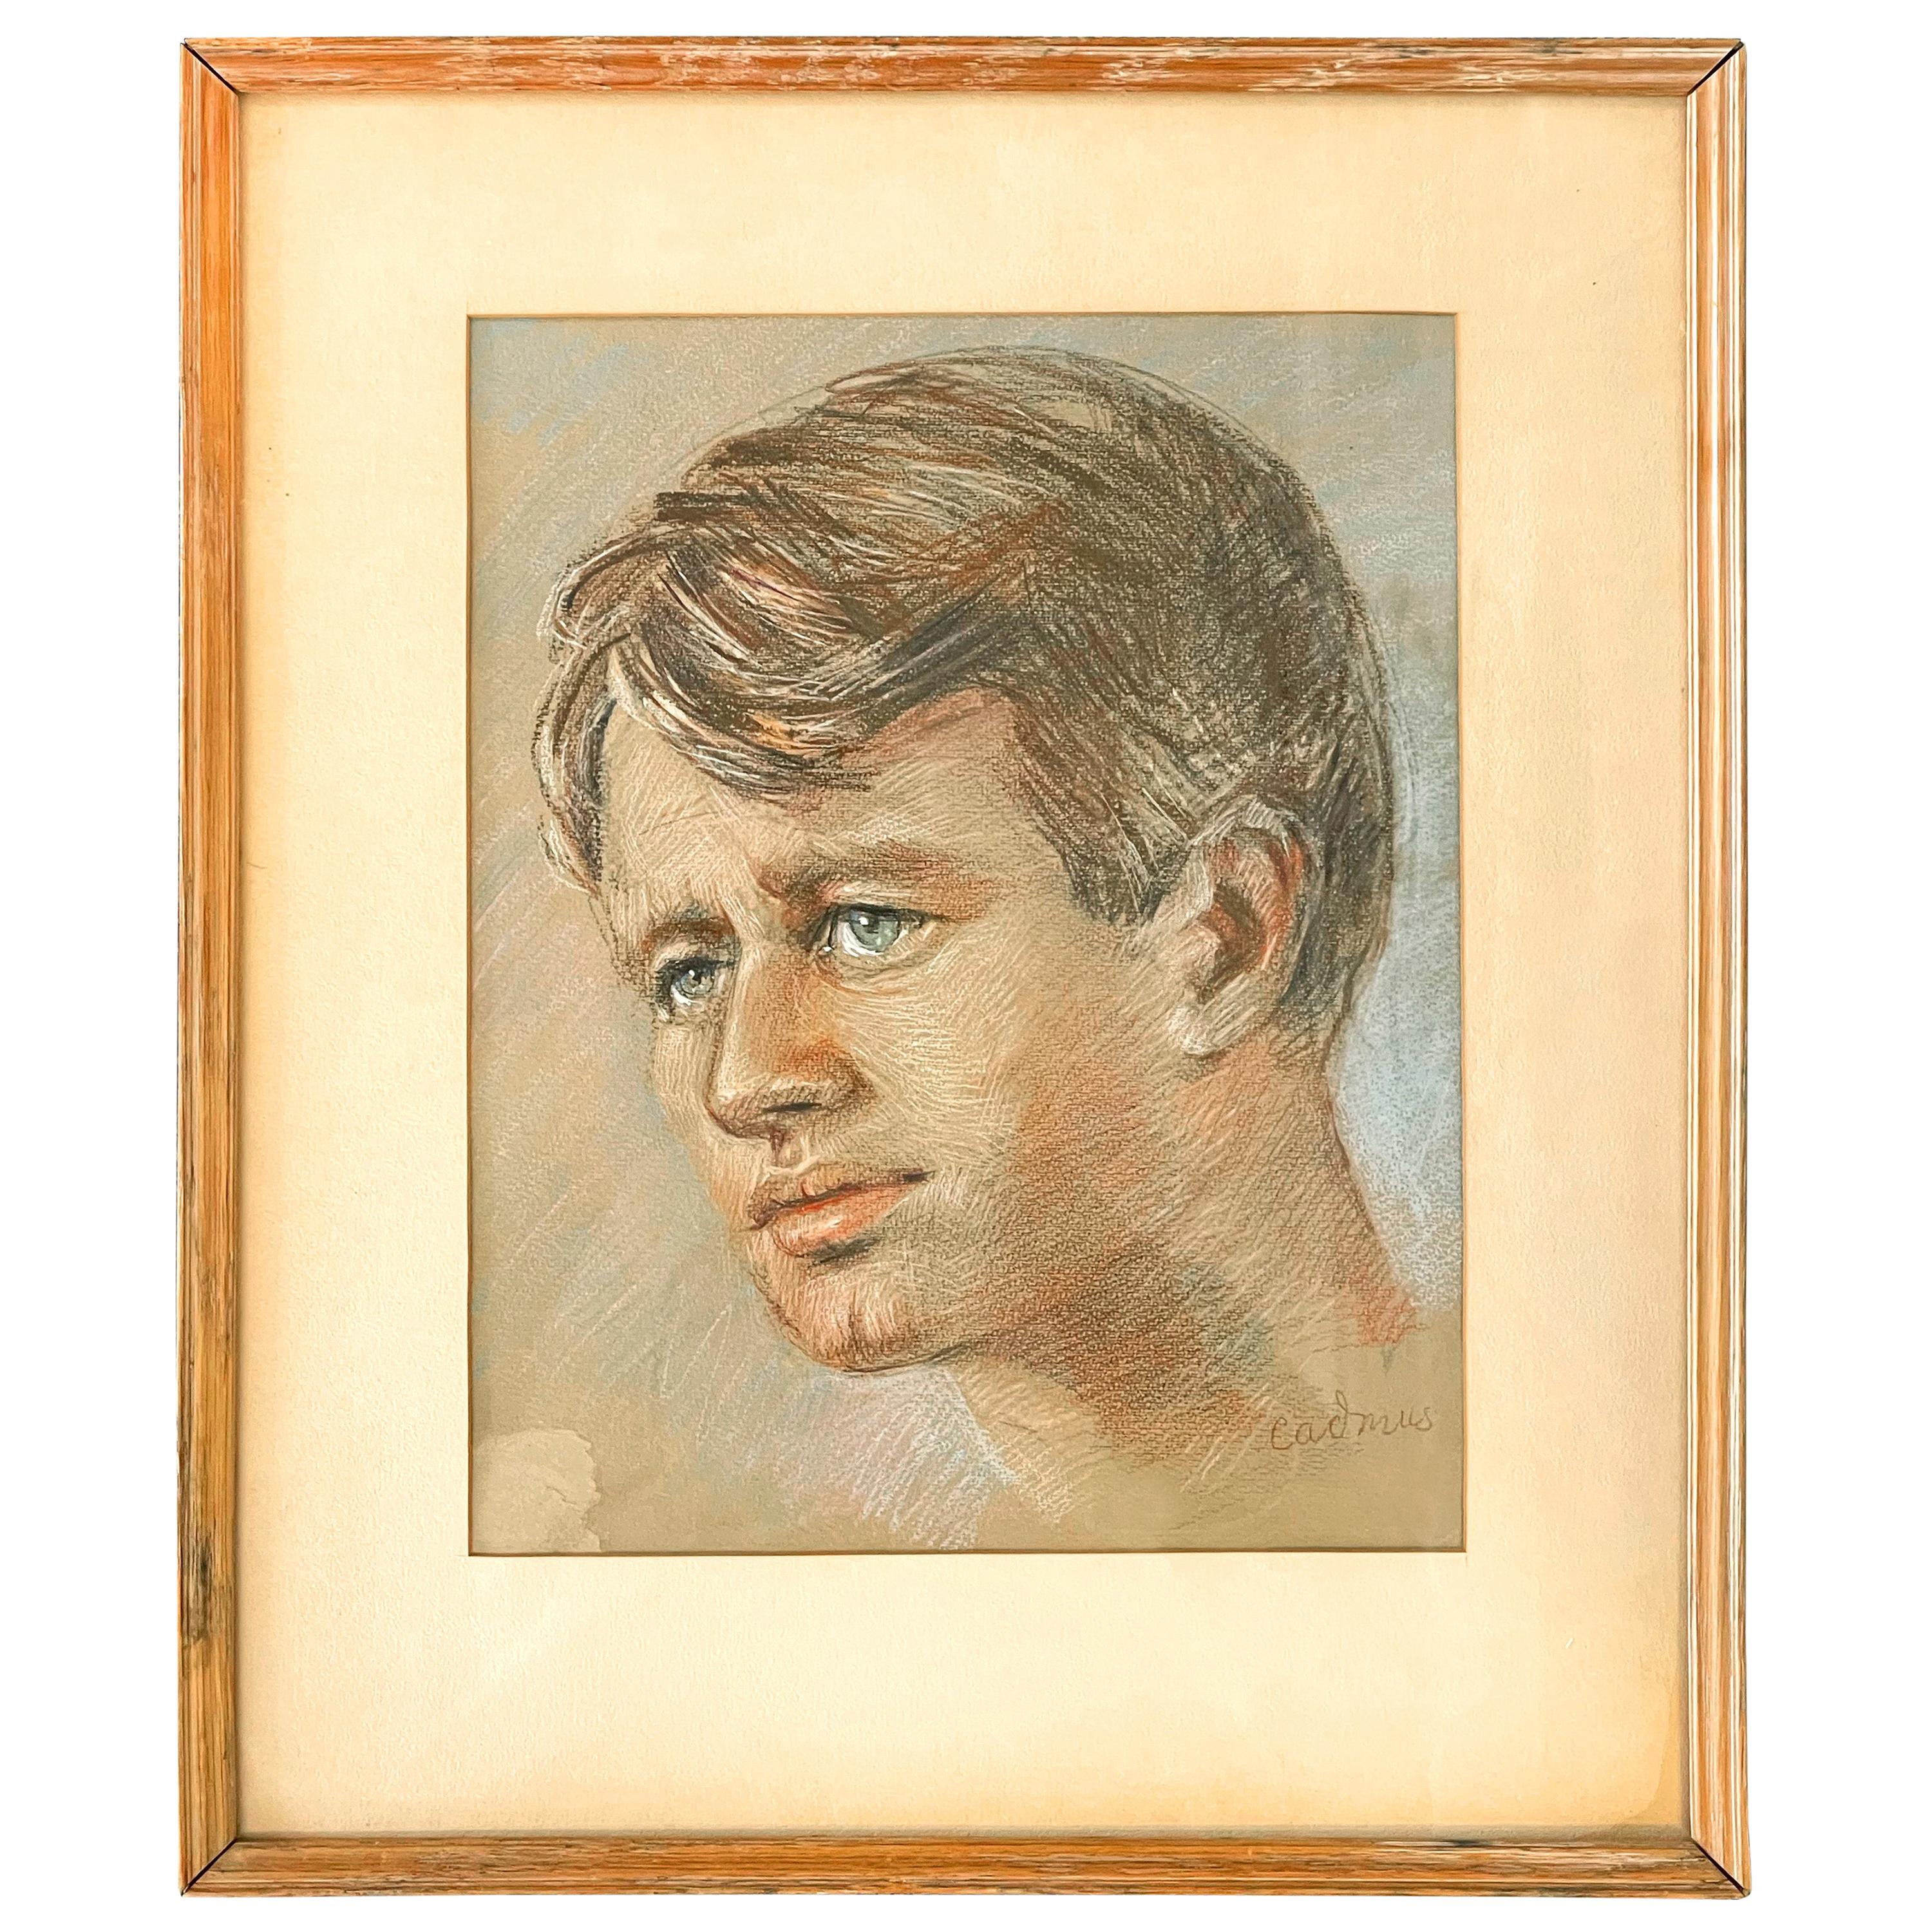 "Man with Blue Eyes, " Portrait by Paul Cadmus, Possibly of Robert F. Kennedy